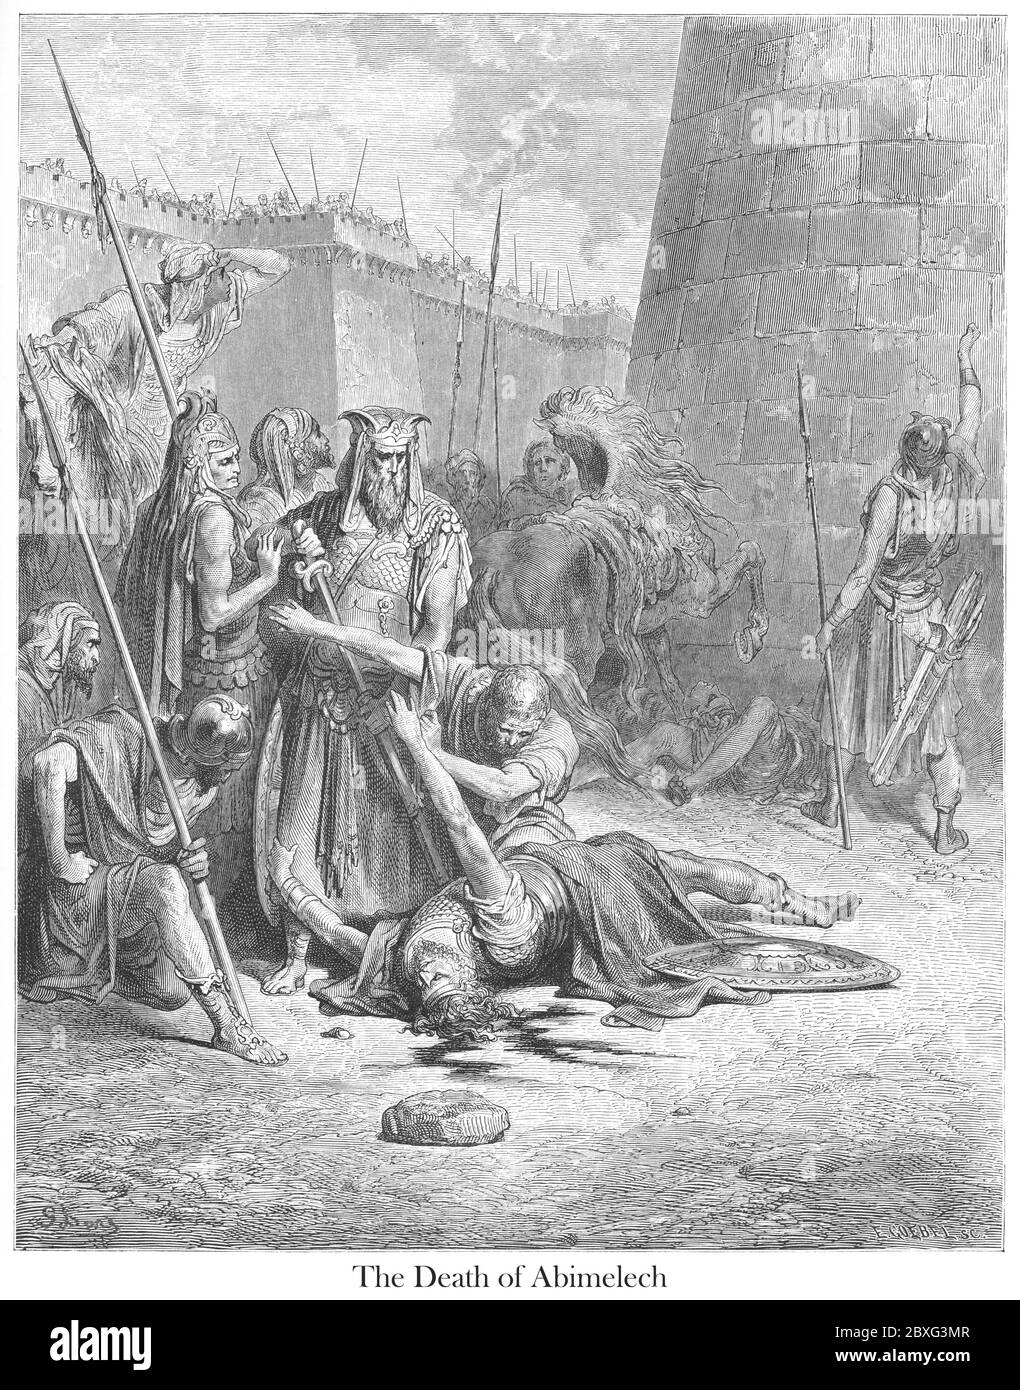 Death of Abimelech [King of Shechem] Judges 9:52-53 From the book 'Bible Gallery' Illustrated by Gustave Dore with Memoir of Dore and Descriptive Letter-press by Talbot W. Chambers D.D. Published by Cassell & Company Limited in London and simultaneously by Mame in Tours, France in 1866 Stock Photo